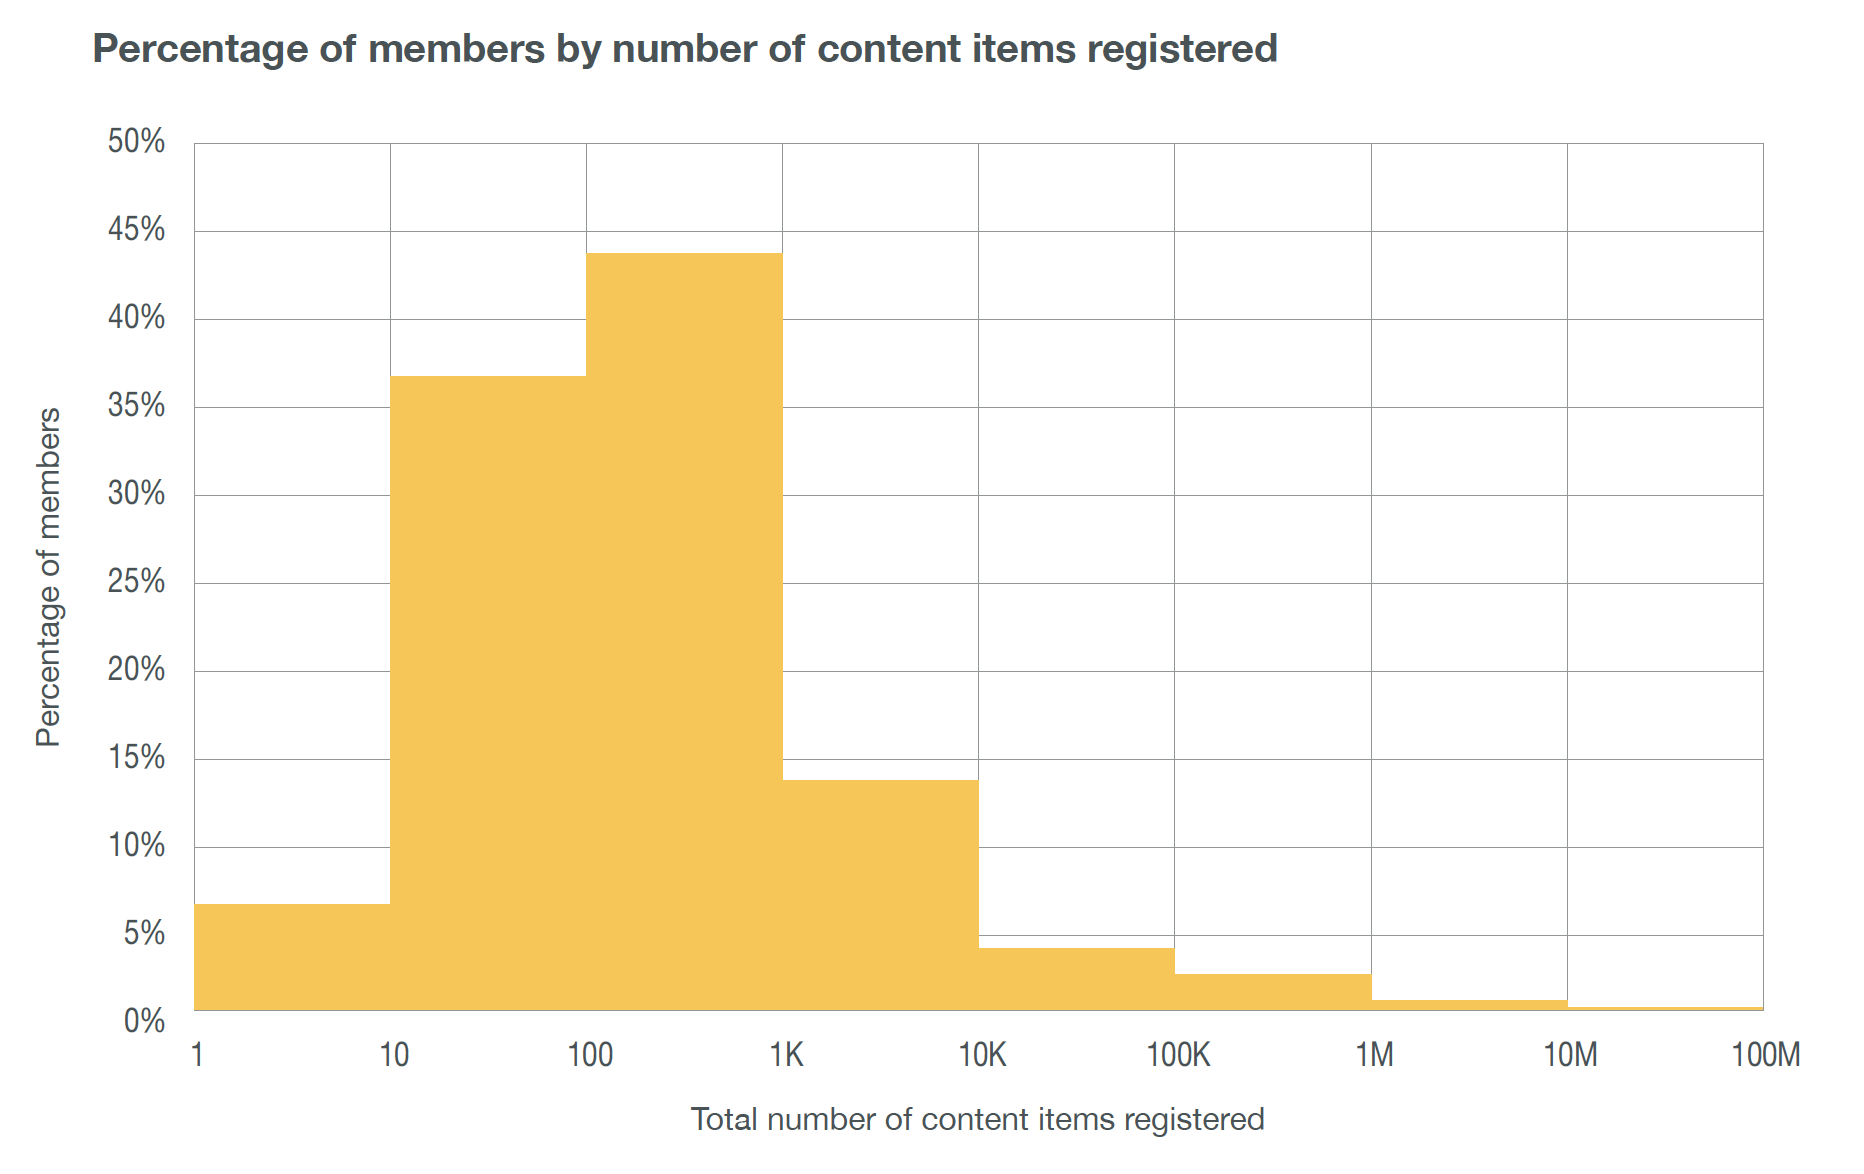 Percentage of members by Content Registration band